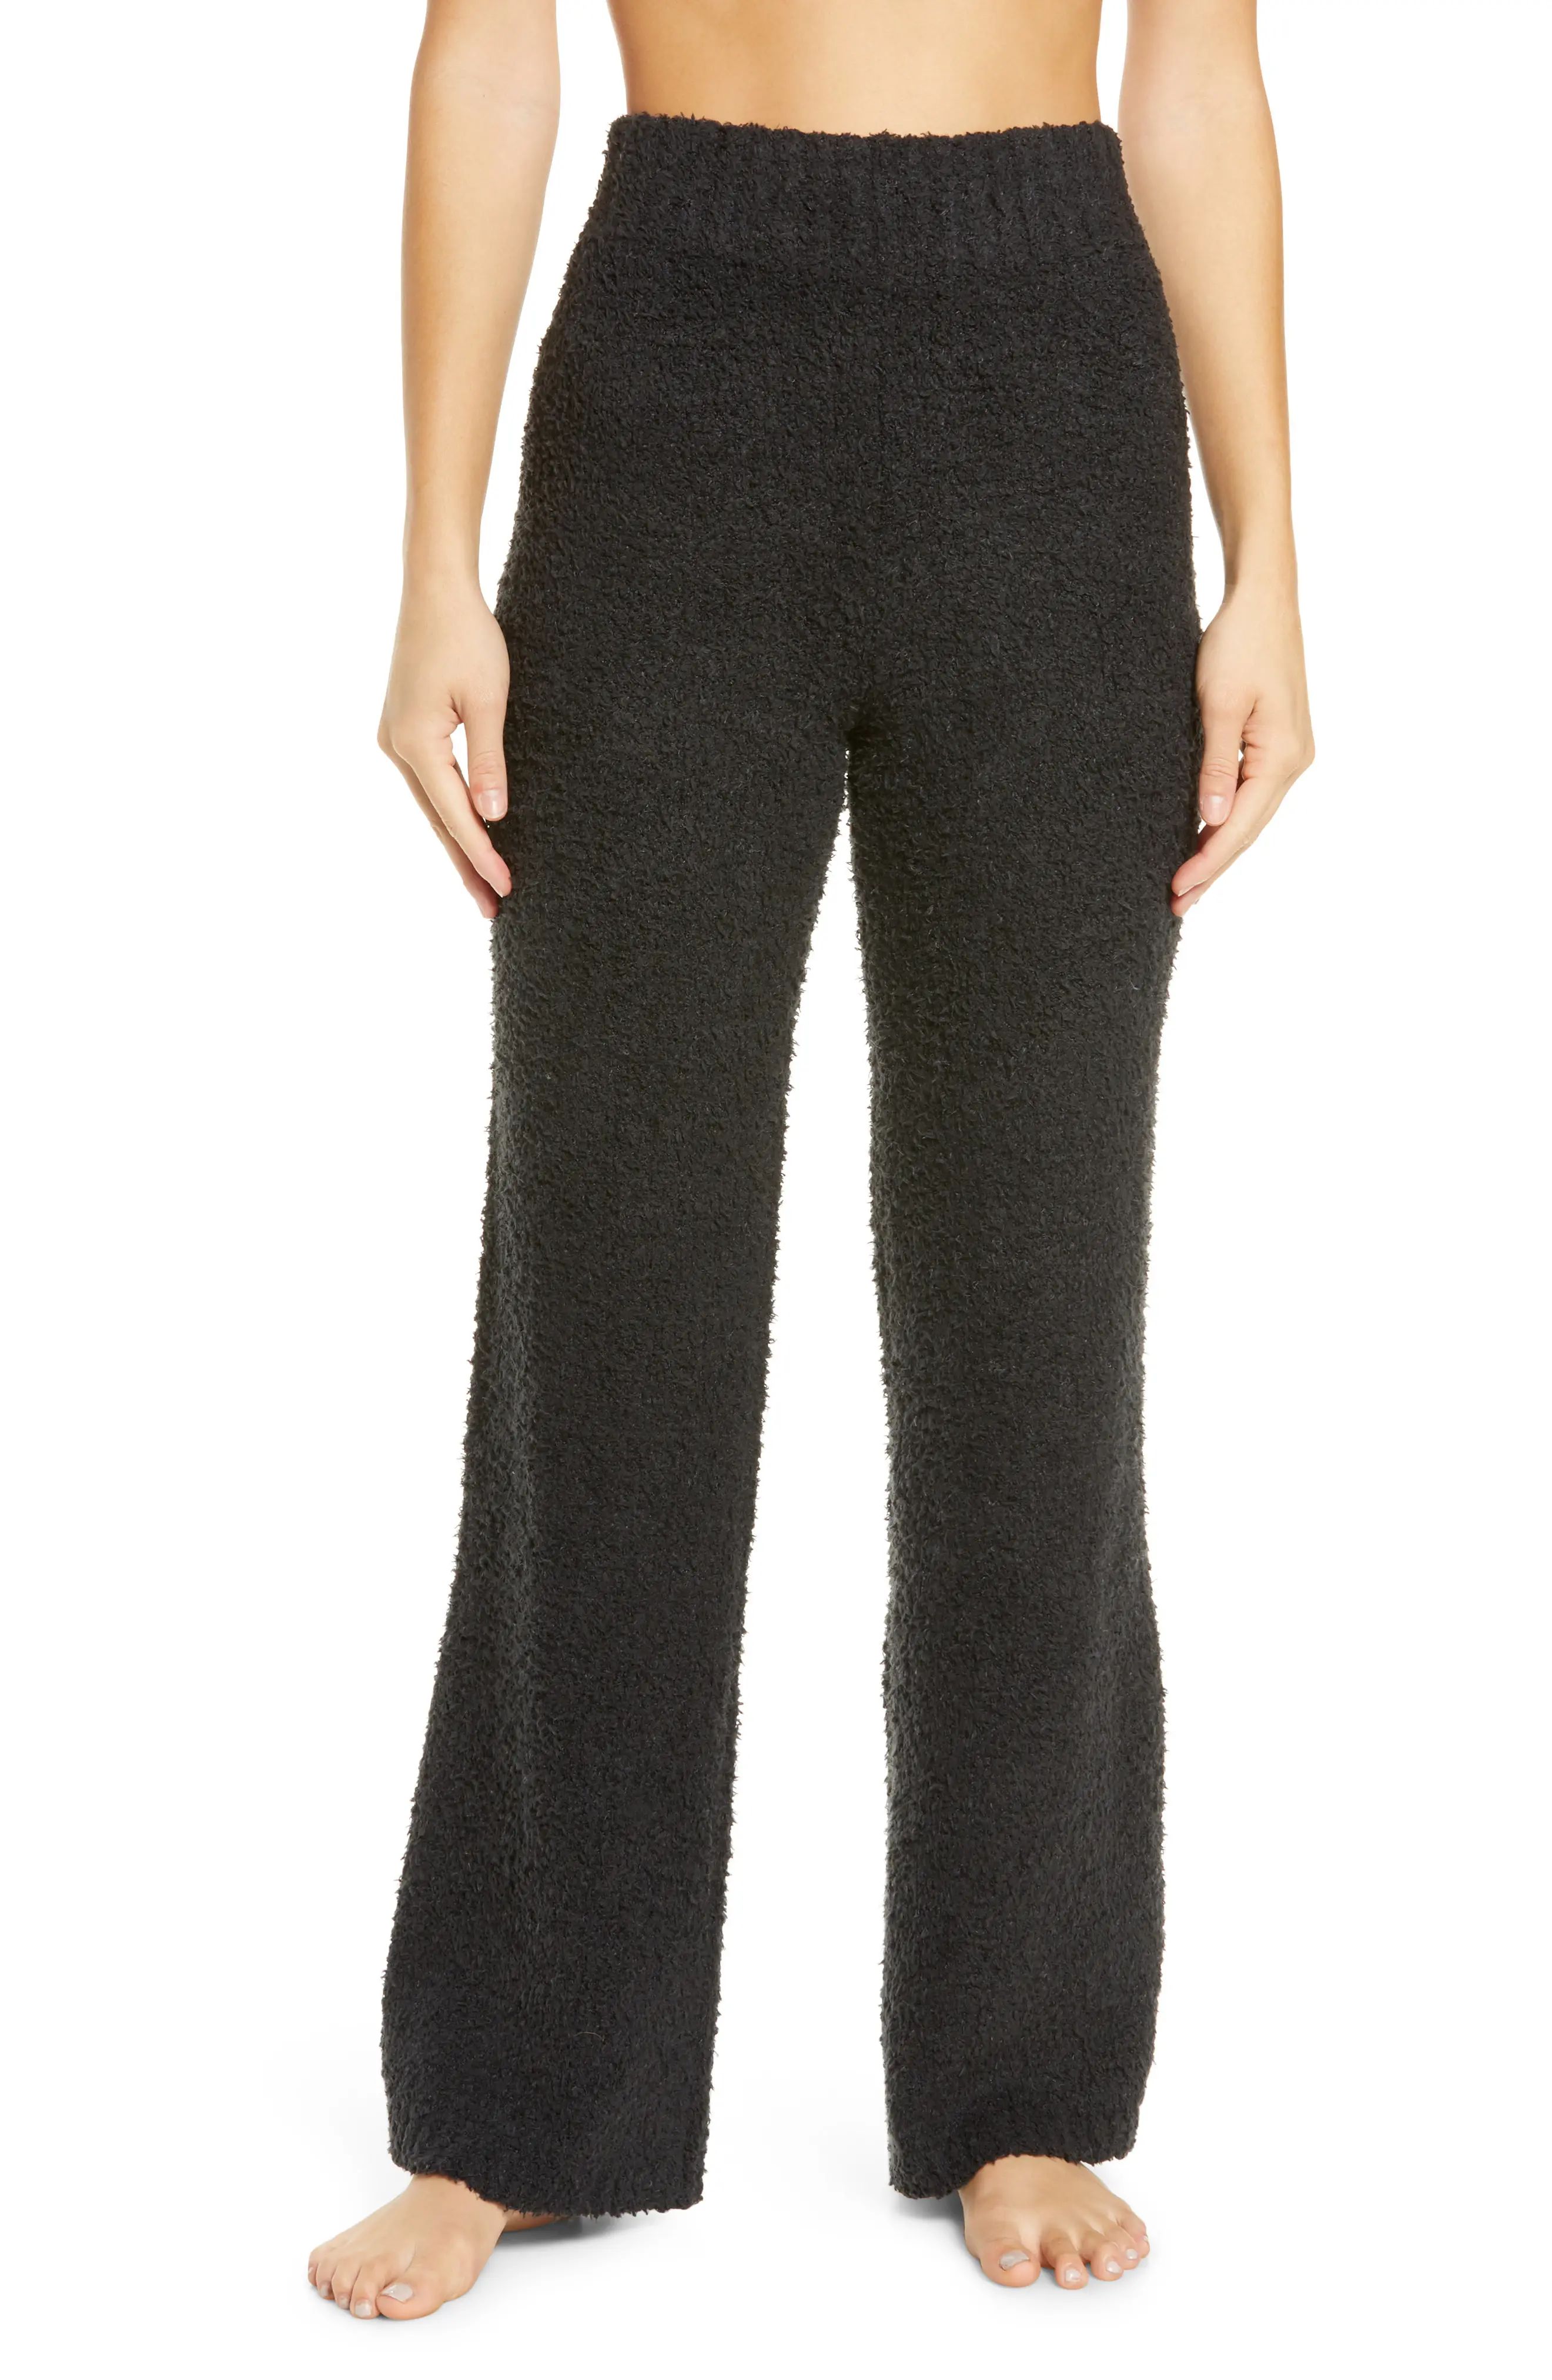 SKIMS Cozy Knit Pants in Onyx at Nordstrom, Size Xx-Small | Nordstrom